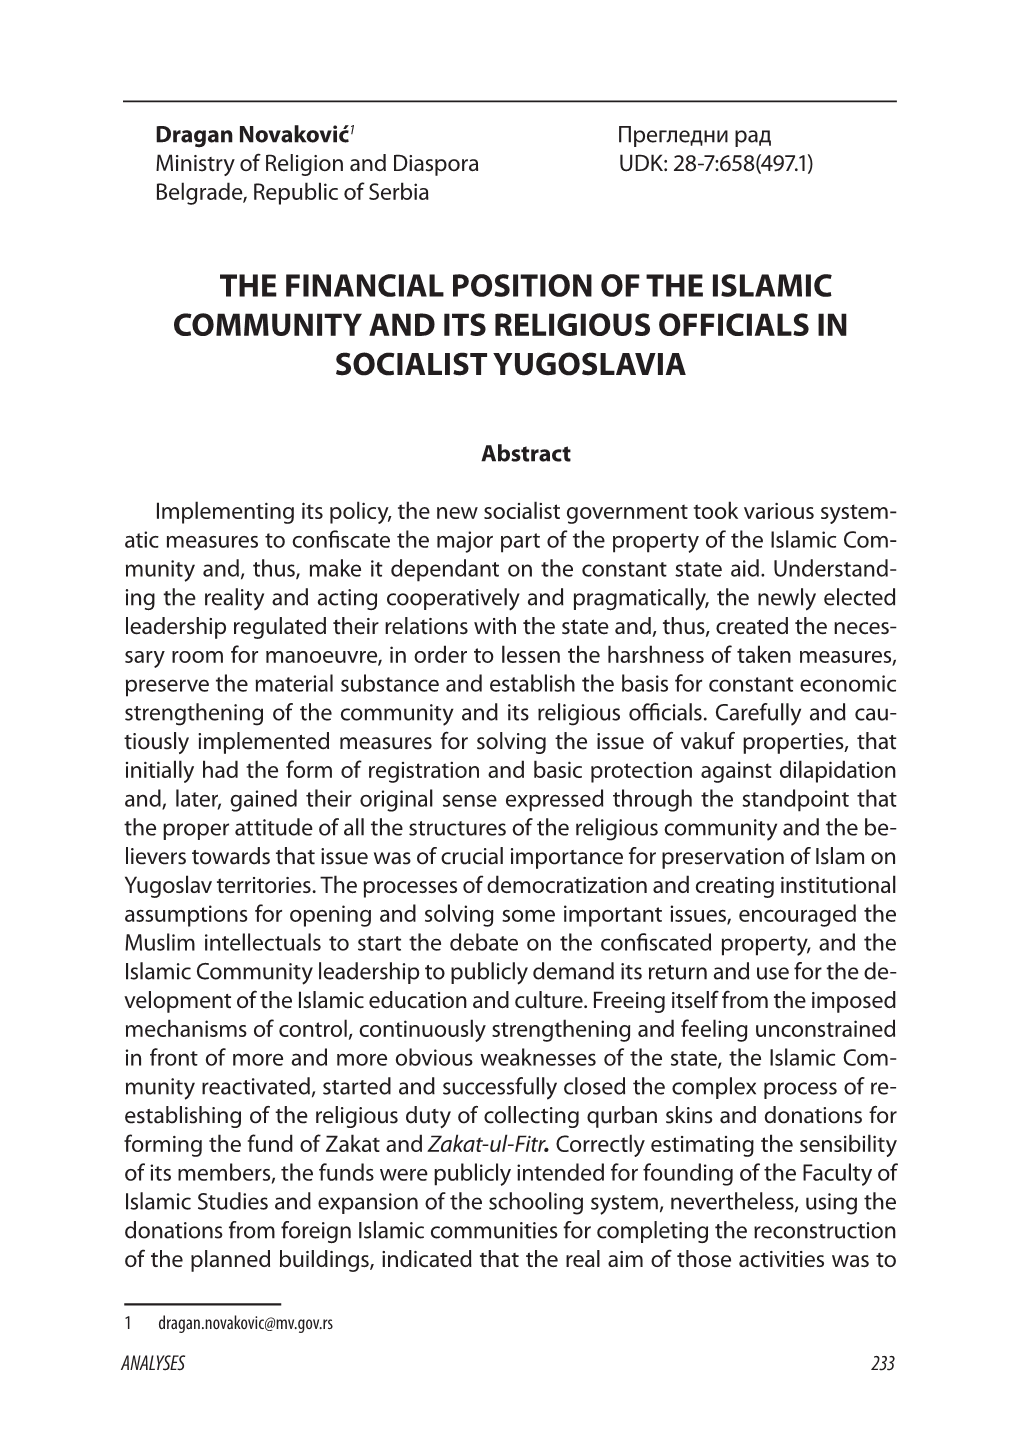 The Financial Position of the Islamic Community and Its Religious Officials in Socialist Yugoslavia